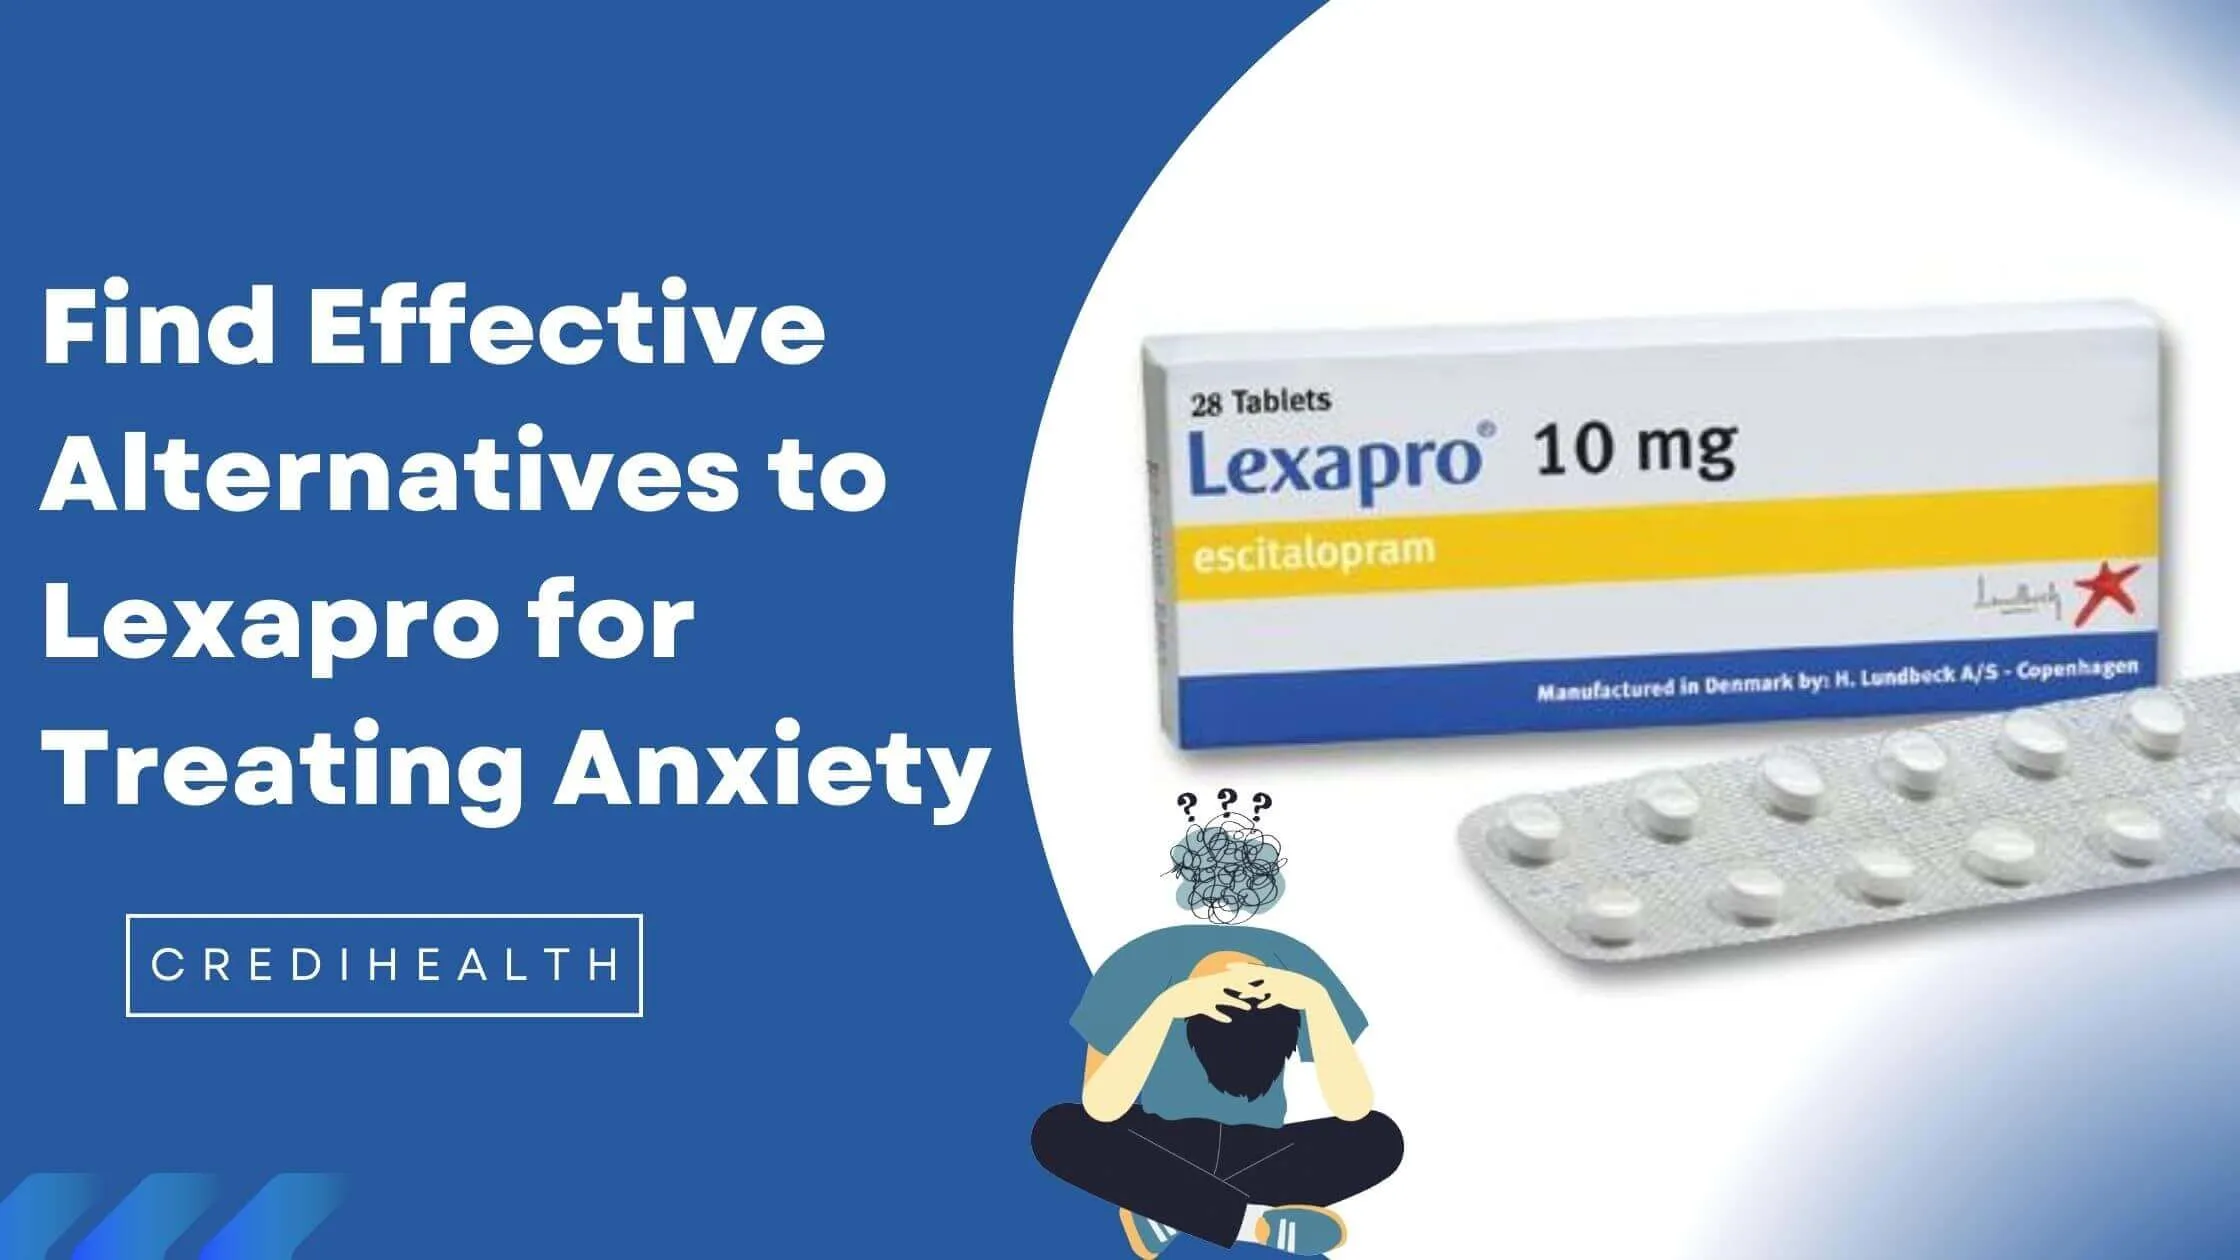 Find Effective Alternatives to Lexapro for Treating Anxiety